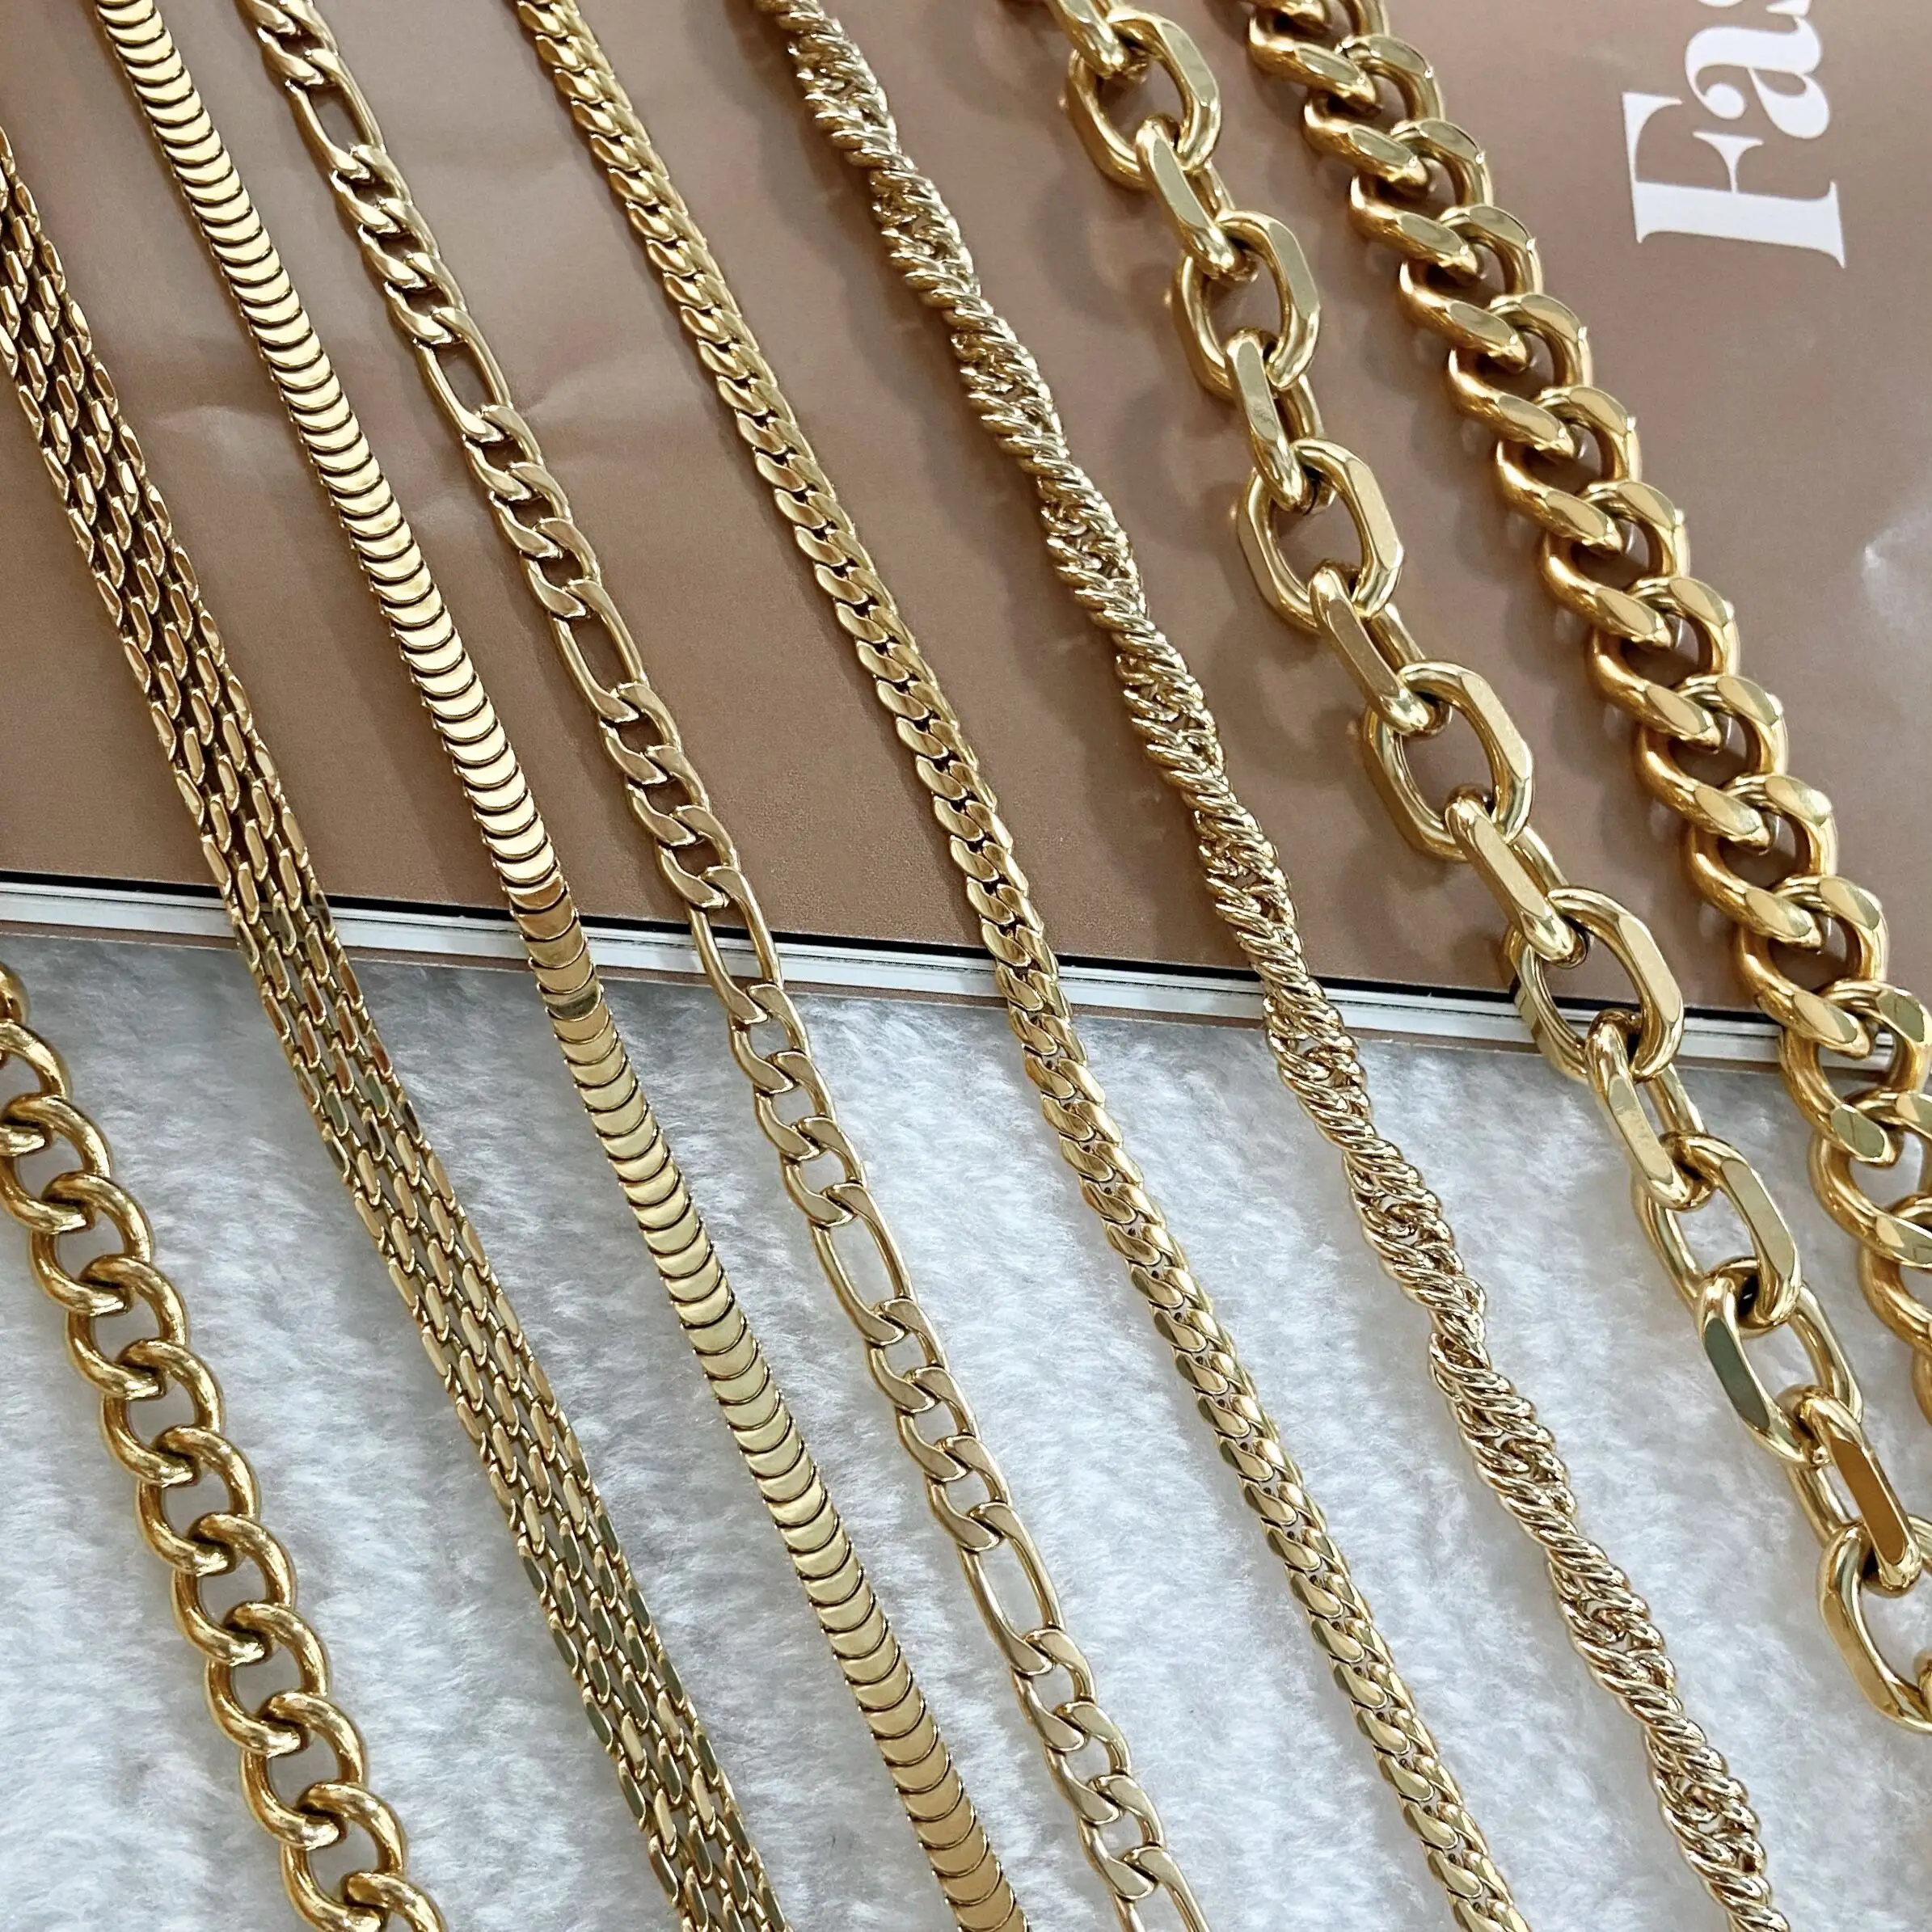 Vintage Men Women Jewelry Cuban Link Curb Chain Necklaces 18K Gold Plated Stainless Steel Multi Chains Necklaces